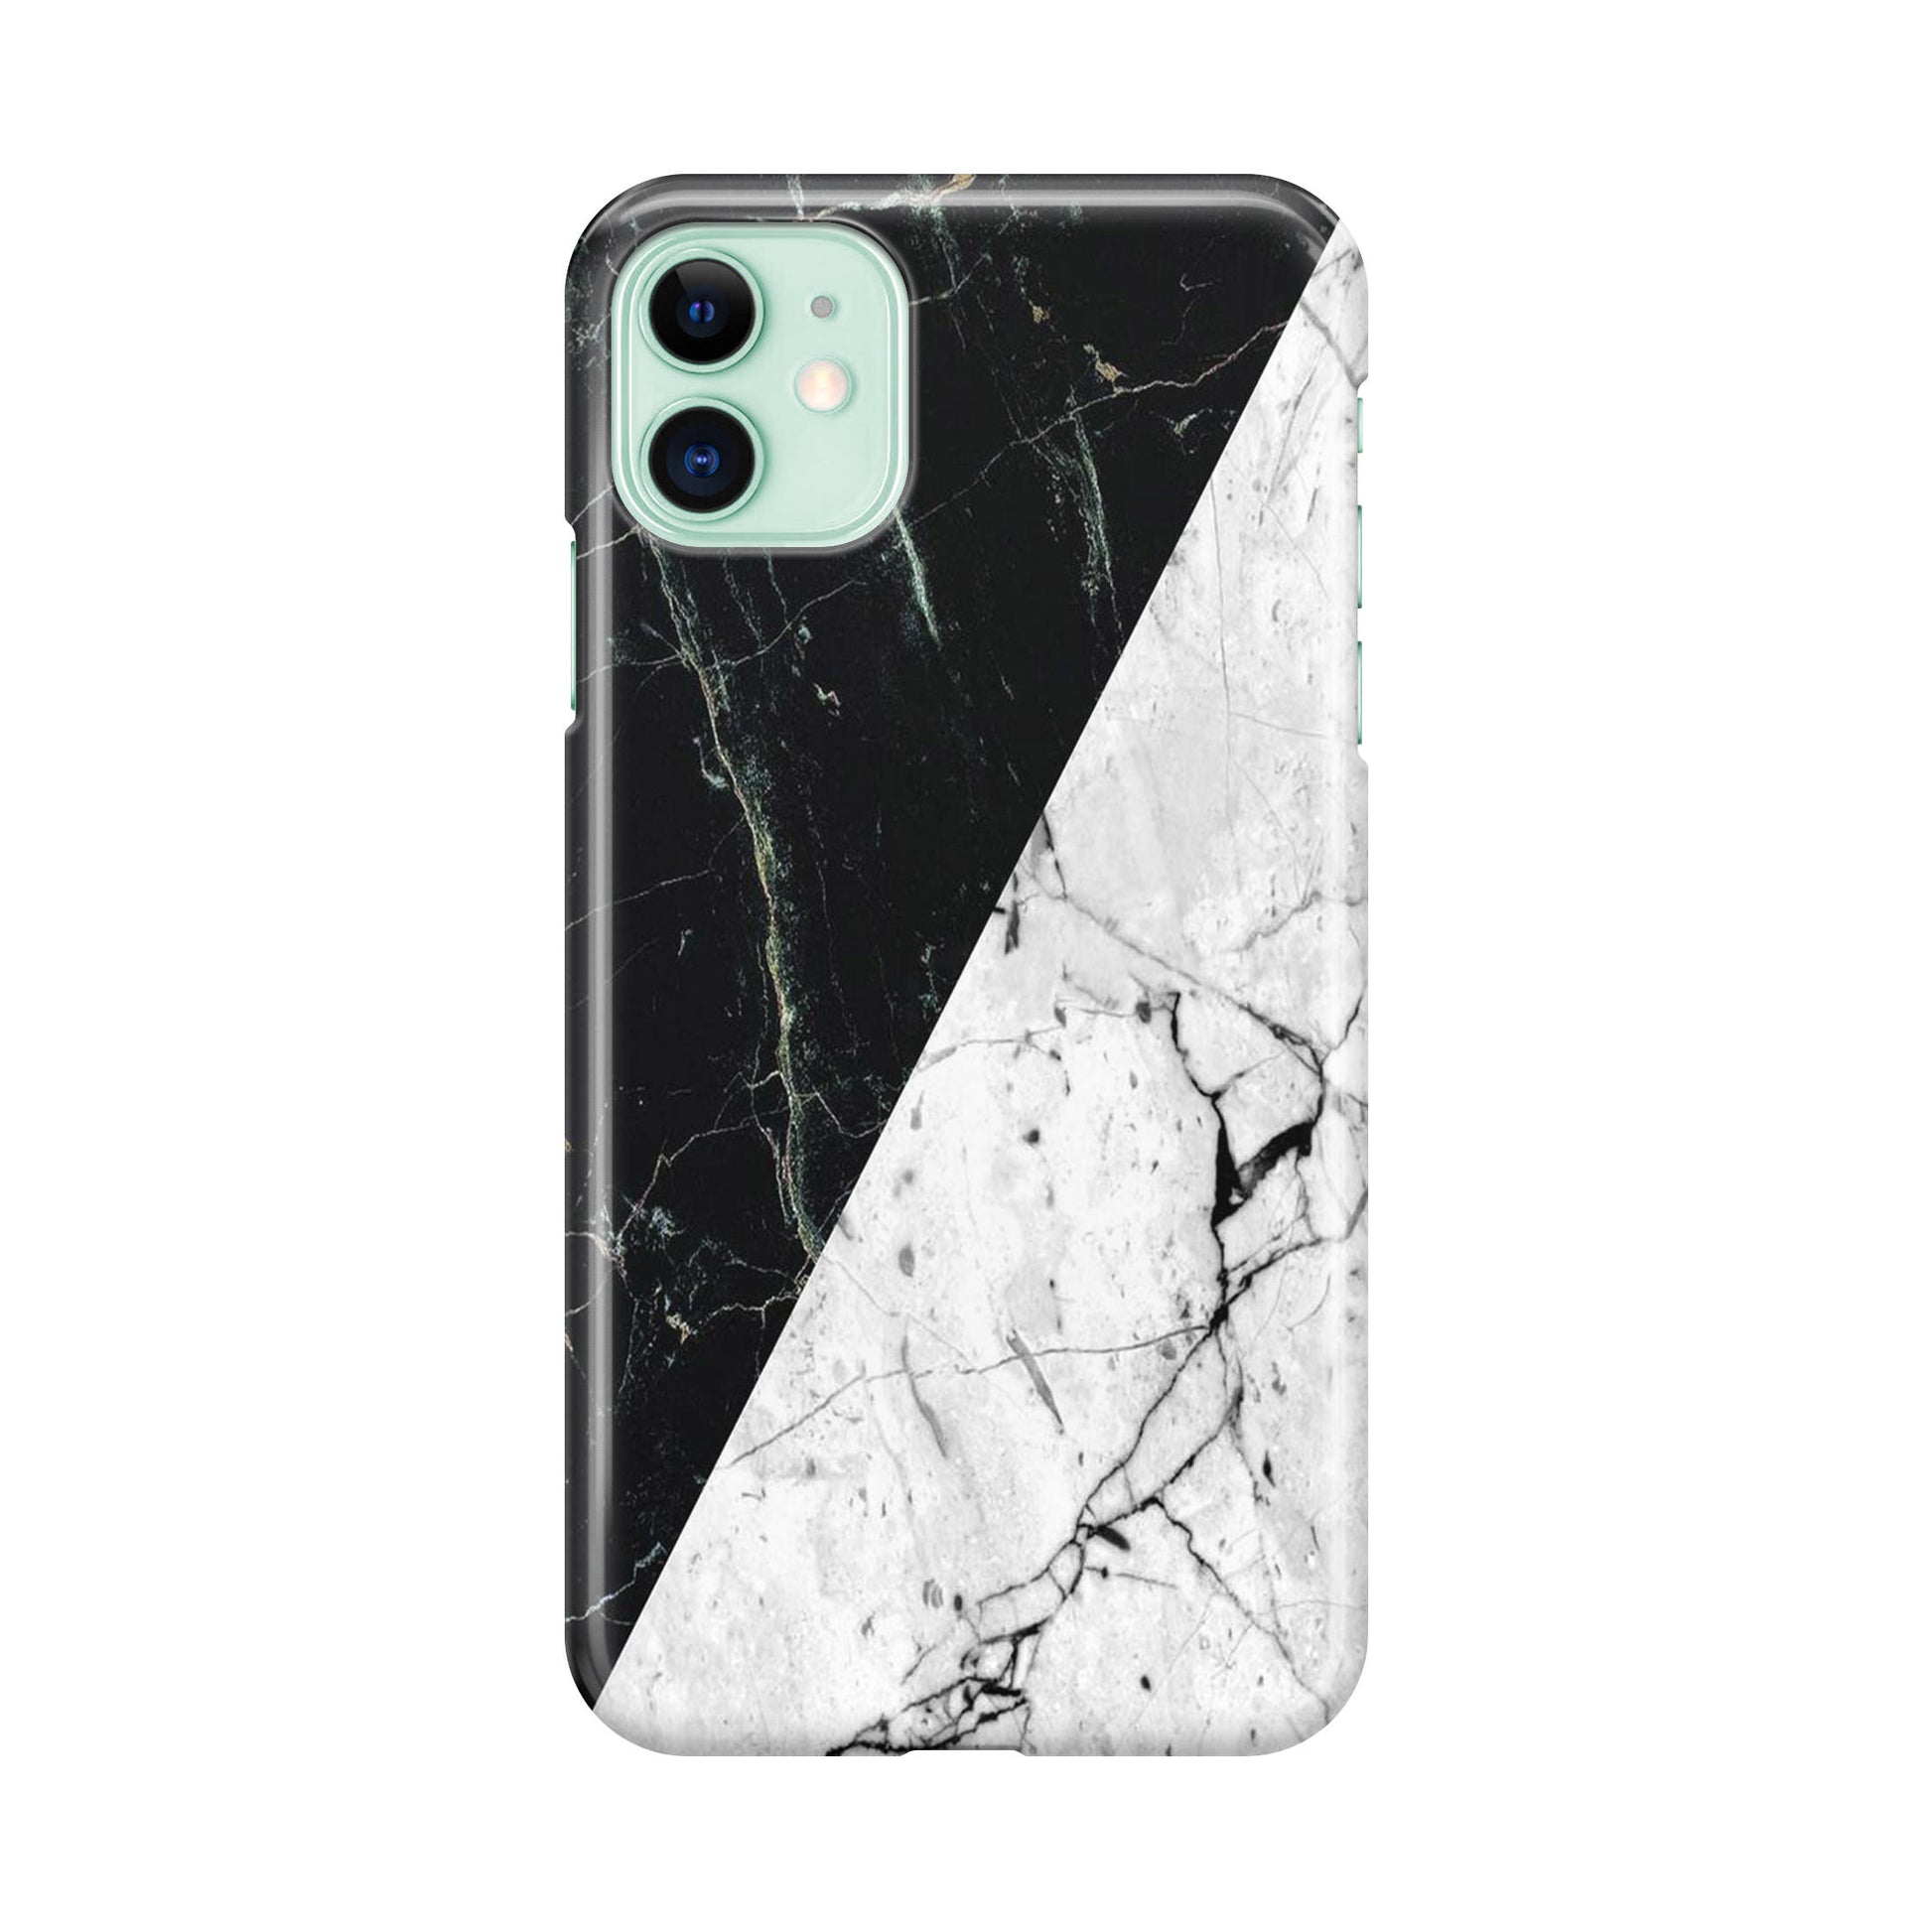 B&W Marble iPhone 12 Case